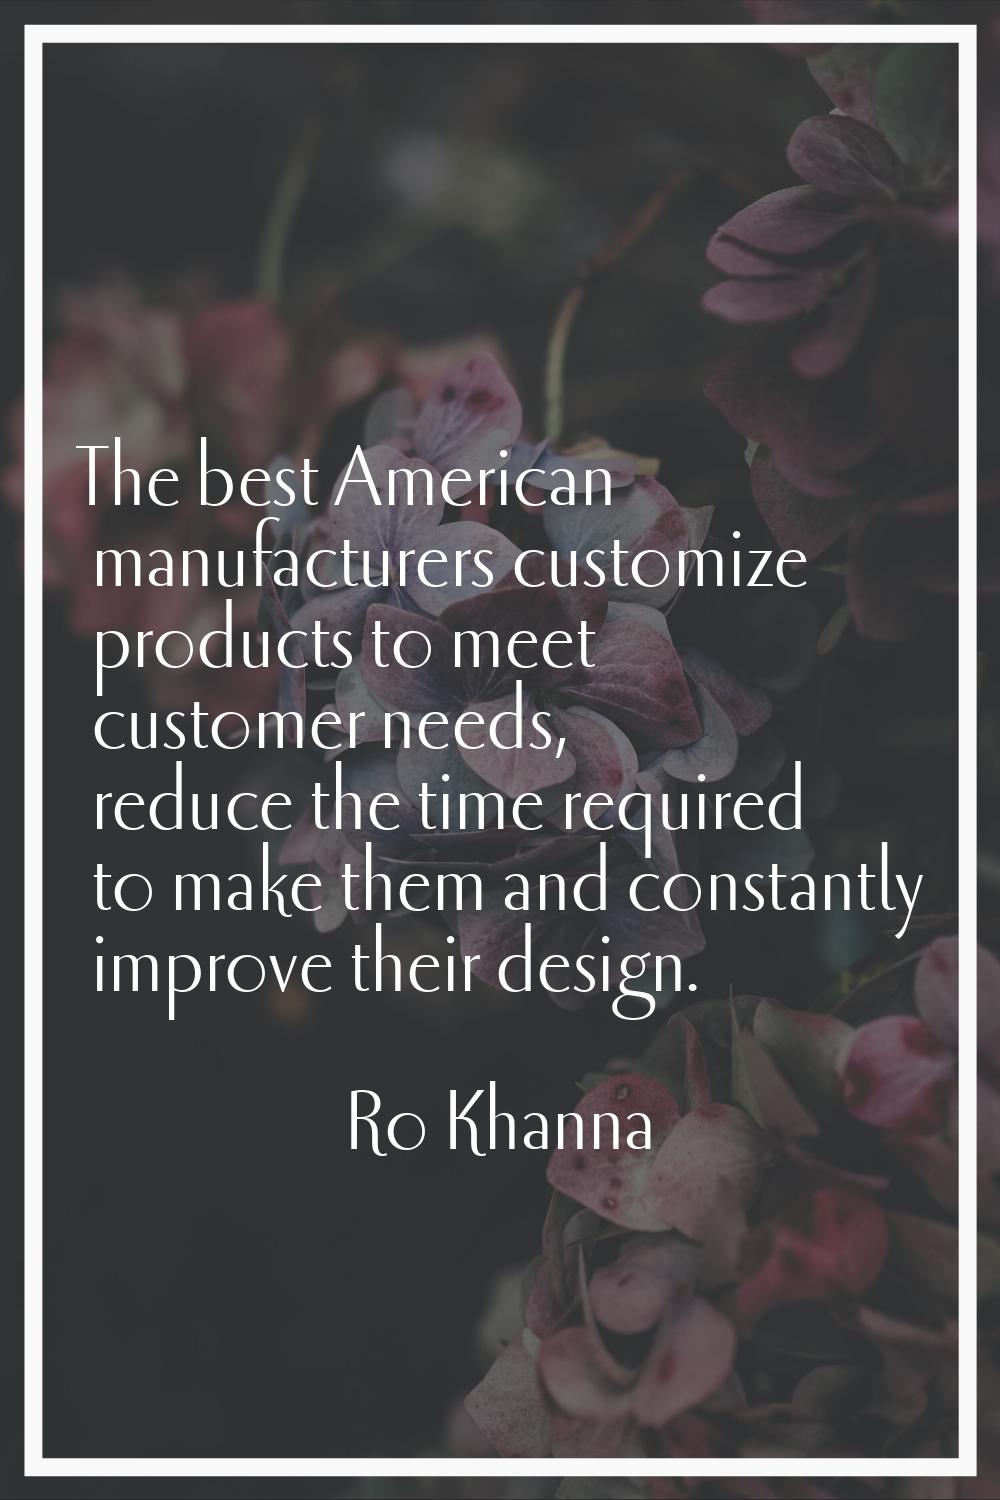 The best American manufacturers customize products to meet customer needs, reduce the time required